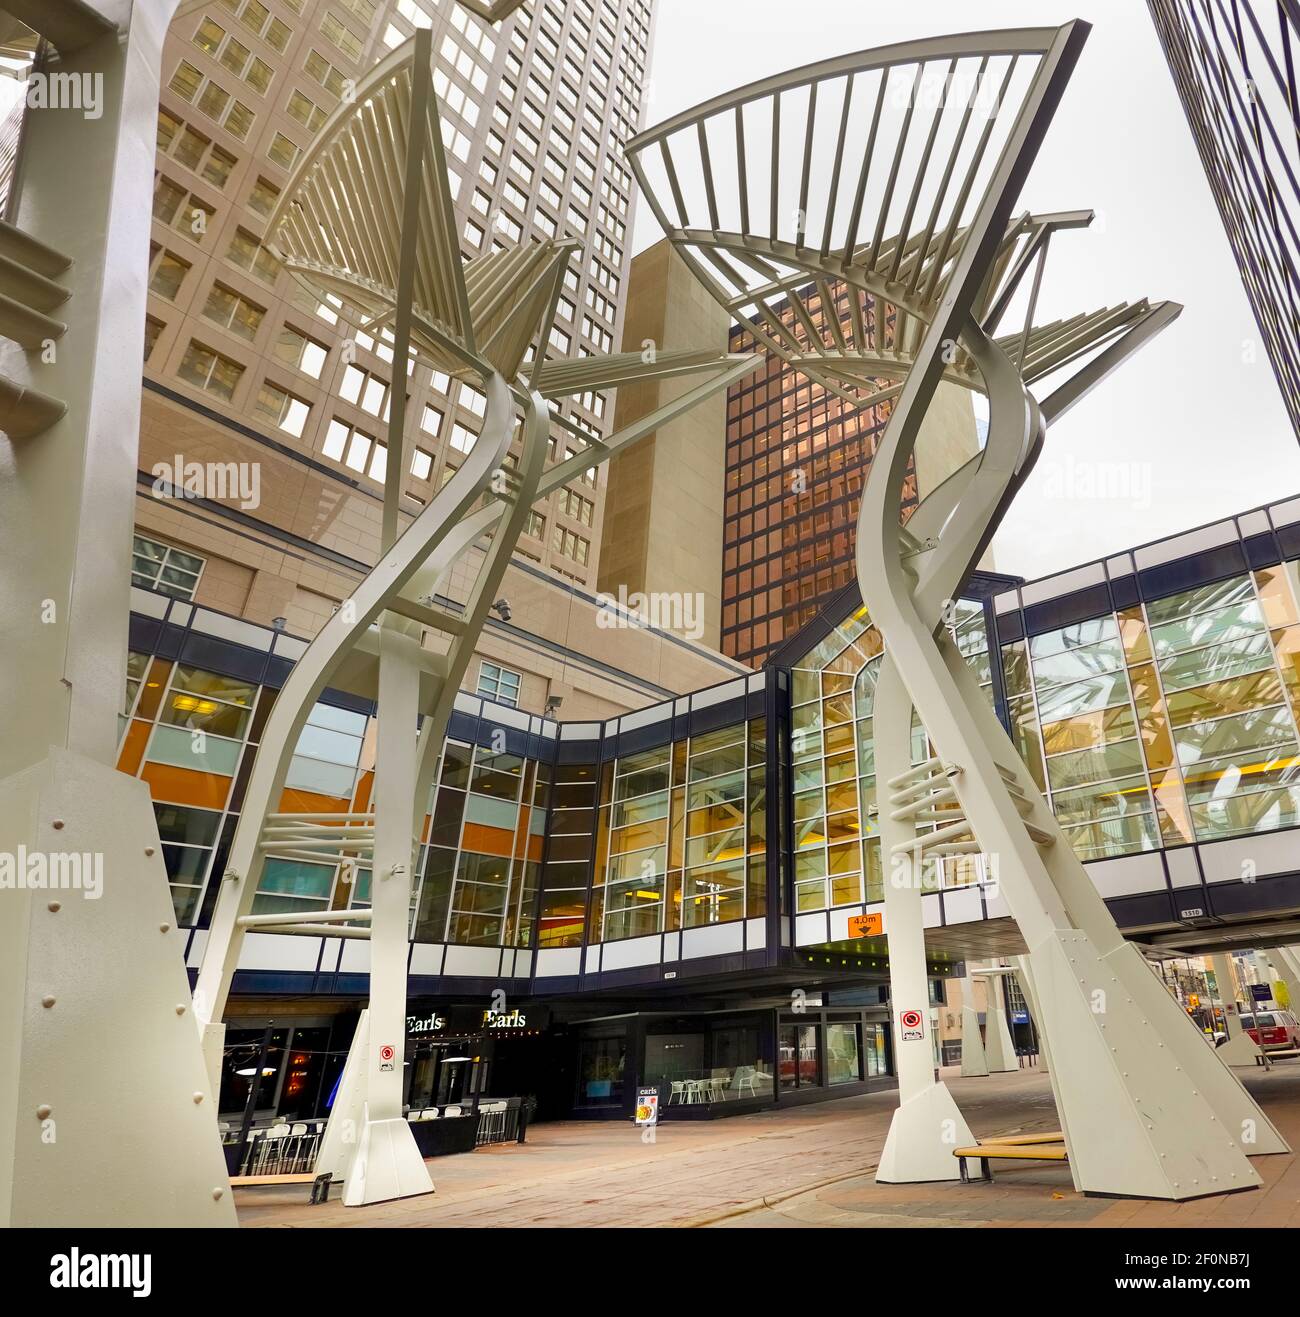 CALGARY, ALBERTA, CANADA, OCTOBER 8, 2018: Stephen Avenue, Calgary, famous steel “Galleria Trees”, by Trizec Hahn Office Properties and others Stock Photo